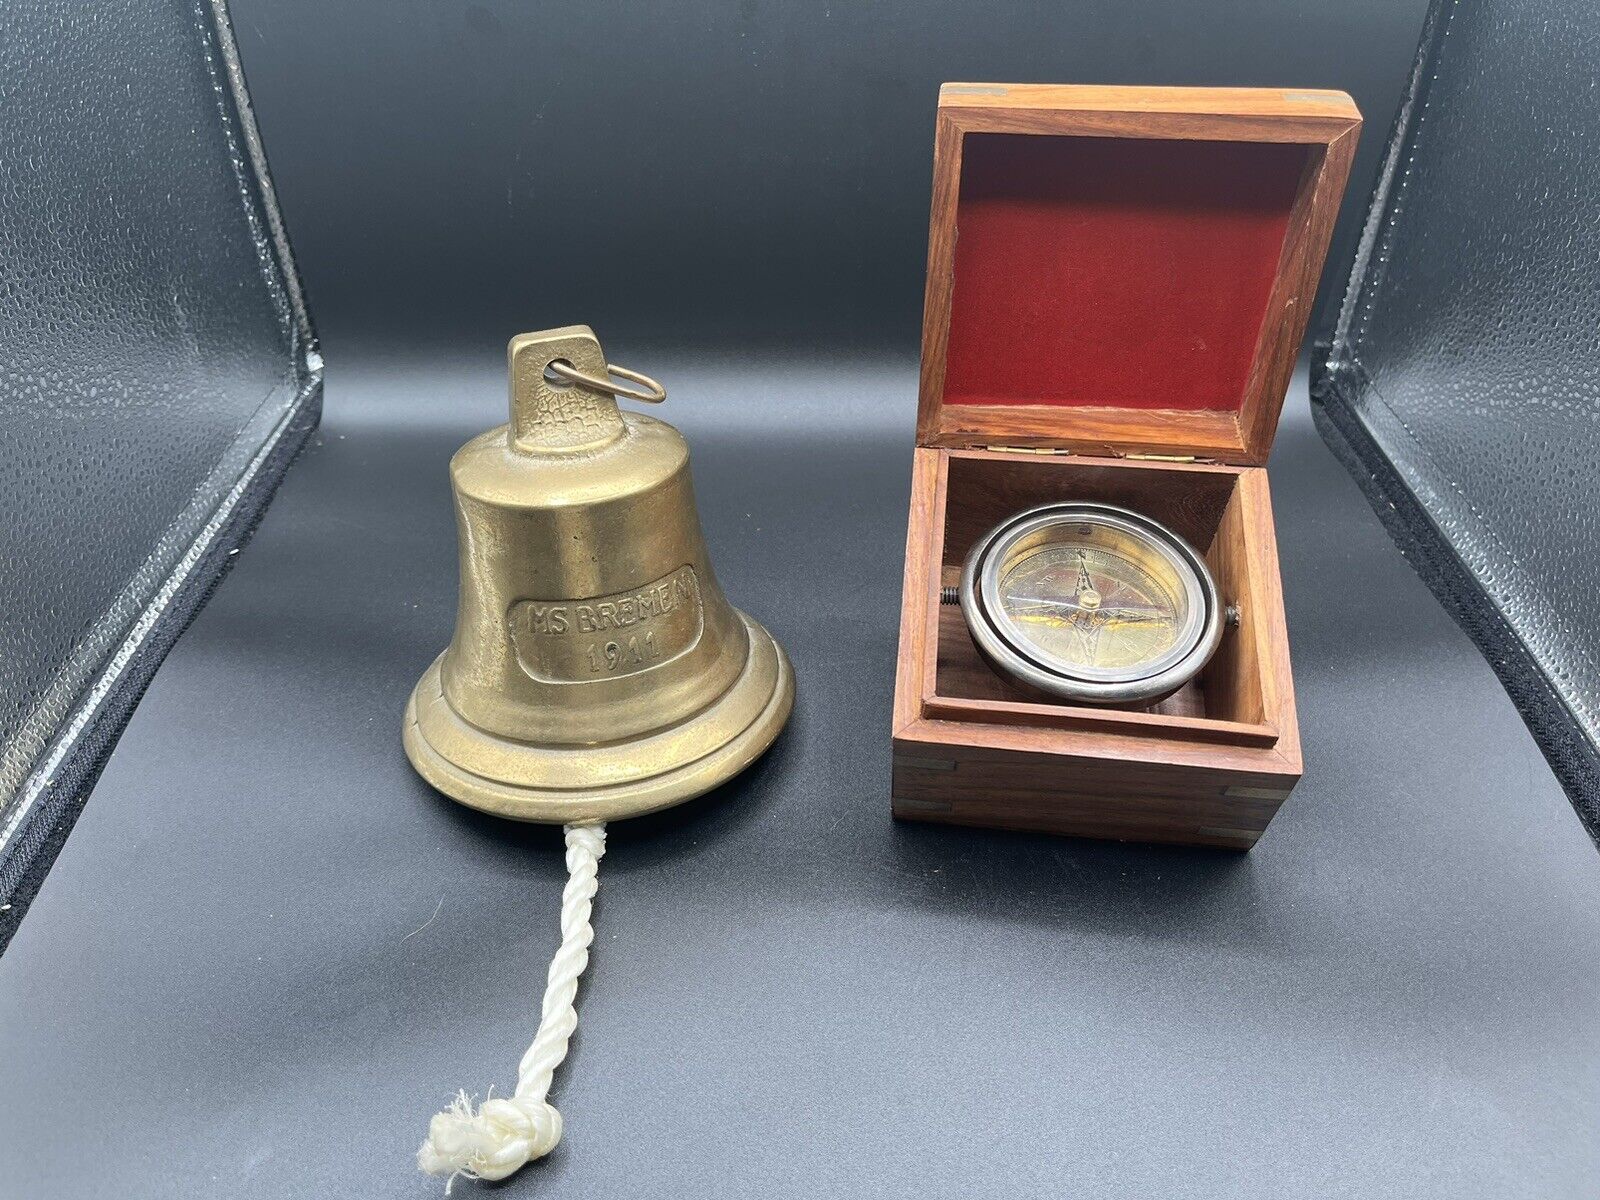 M.S Bremen Brass Bell And Captains Compasss